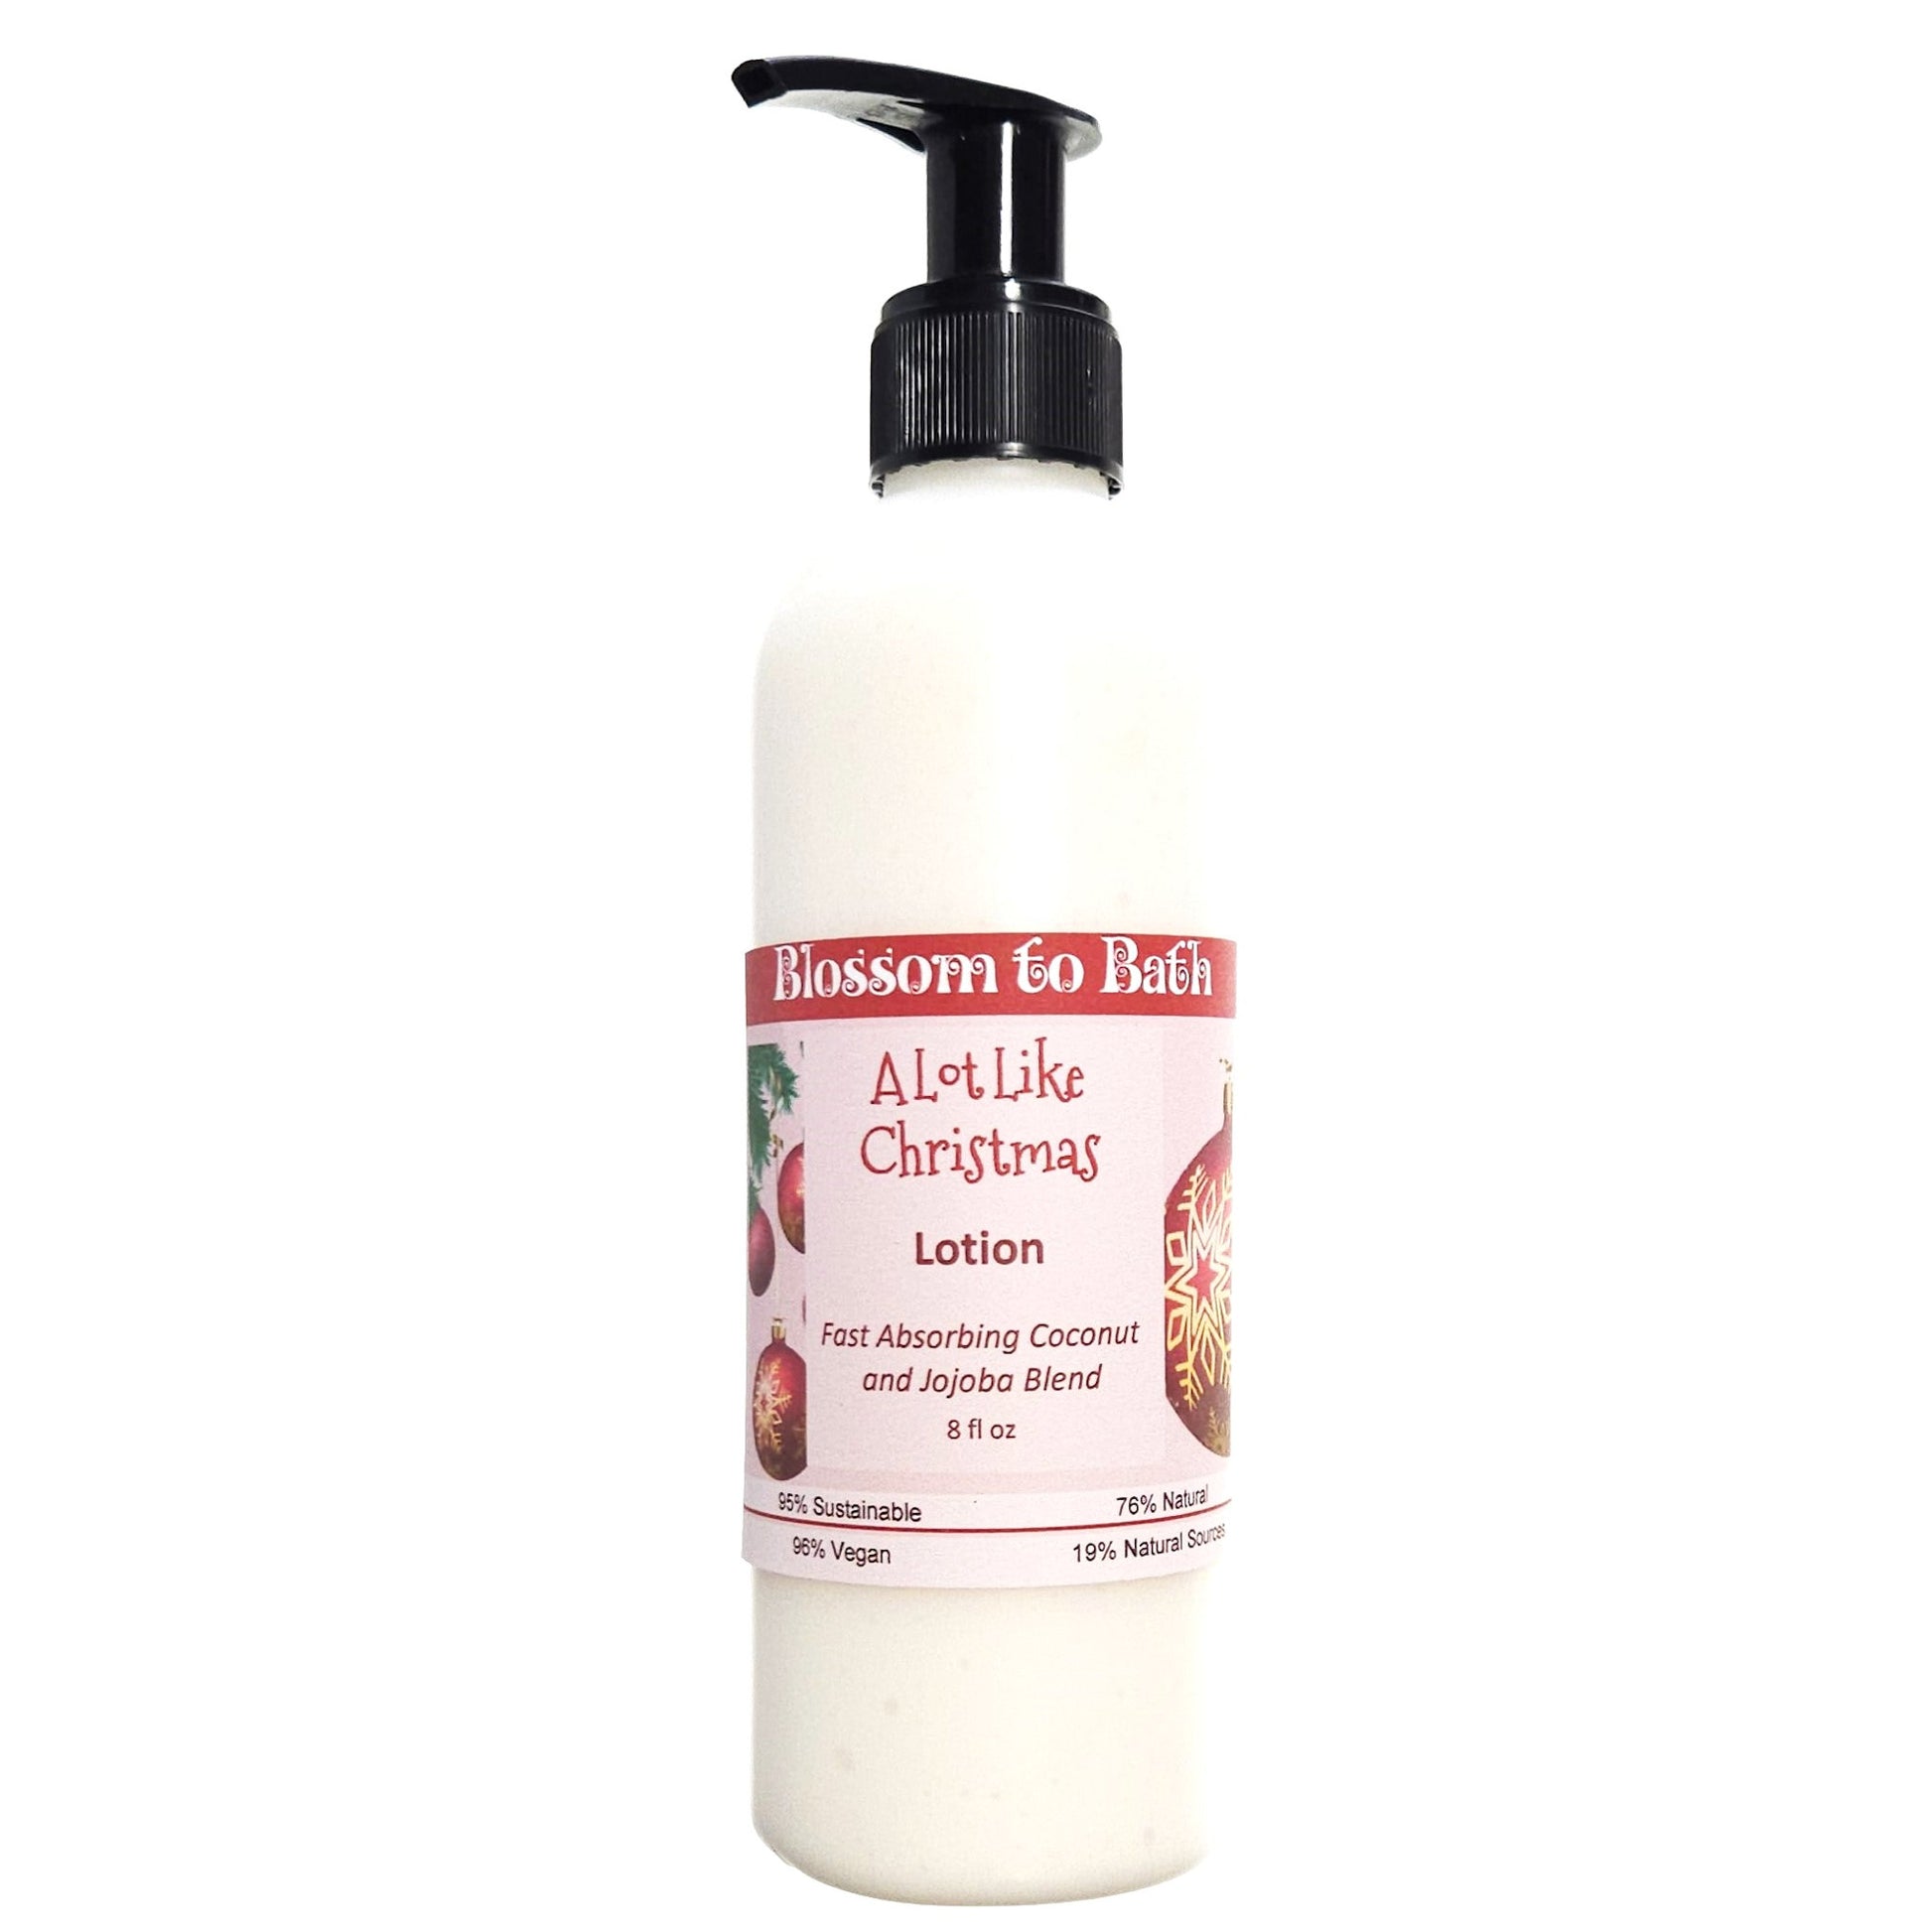 Buy Blossom to Bath A Lot Like Christmas Lotion from Flowersong Soap Studio.  Daily moisture  that soaks in quickly made with organic oils and butters that soften and smooth the skin  Find the holiday mood in an instant with this spicy sweet fragrance.